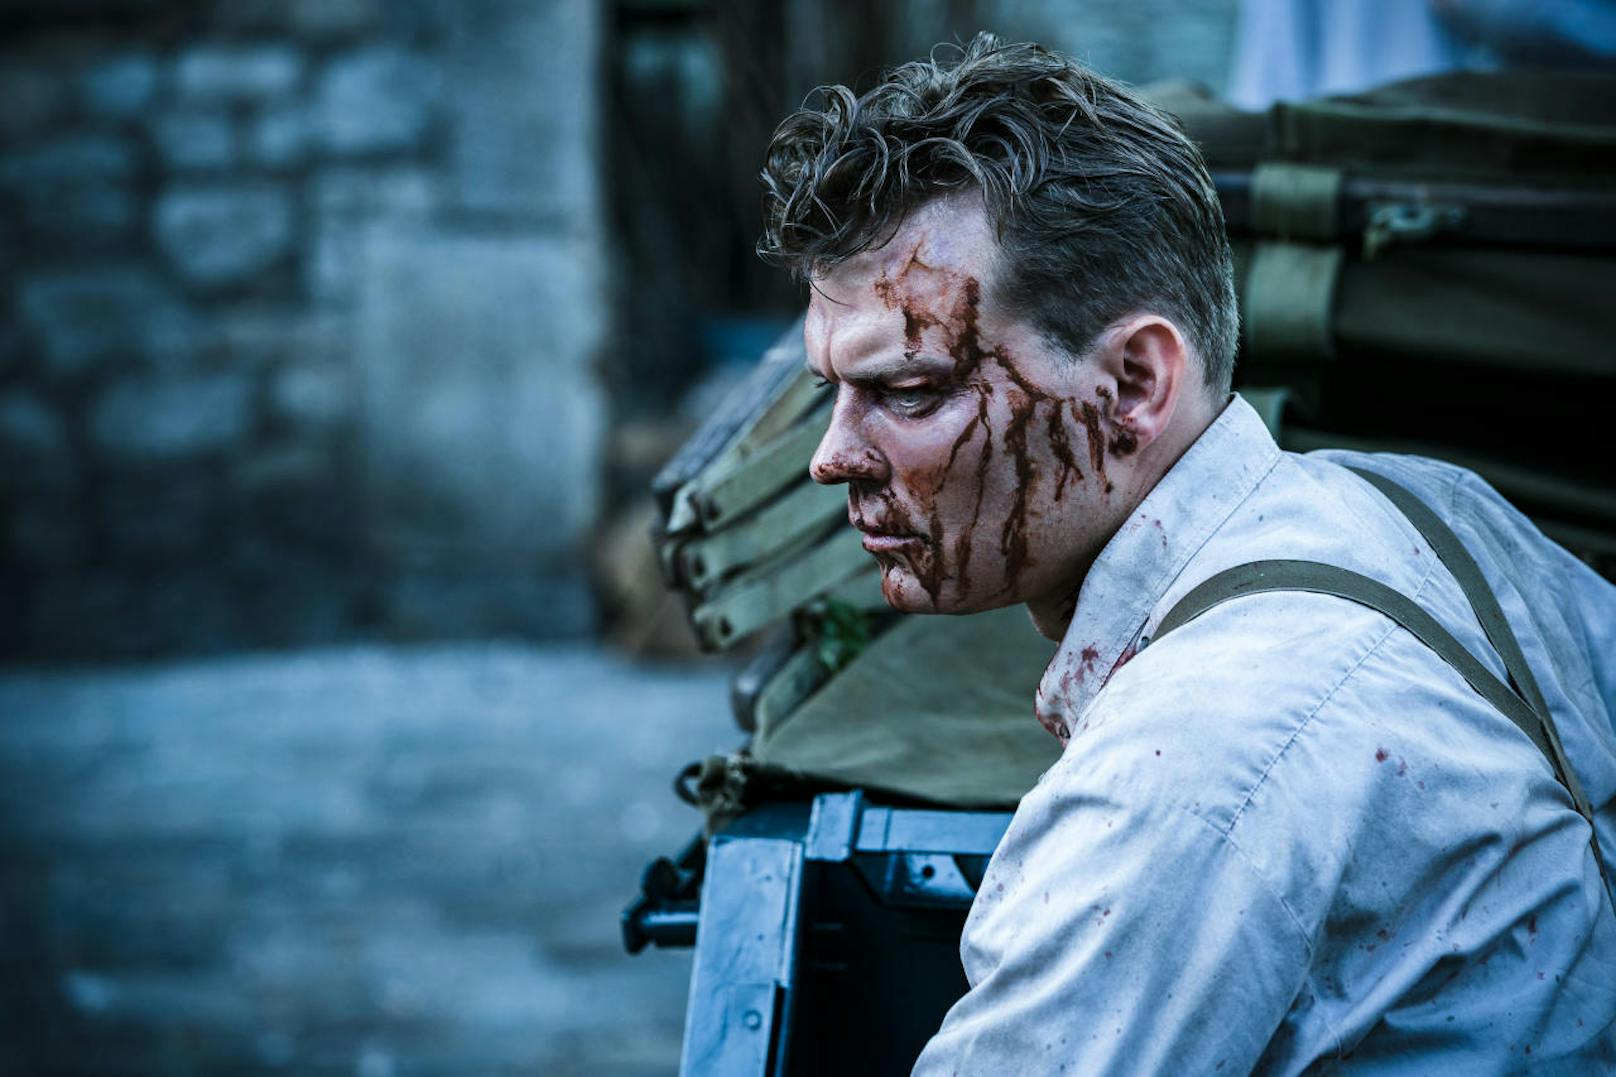 Pilou Asbaek als Wafner in "Operation: Overlord"